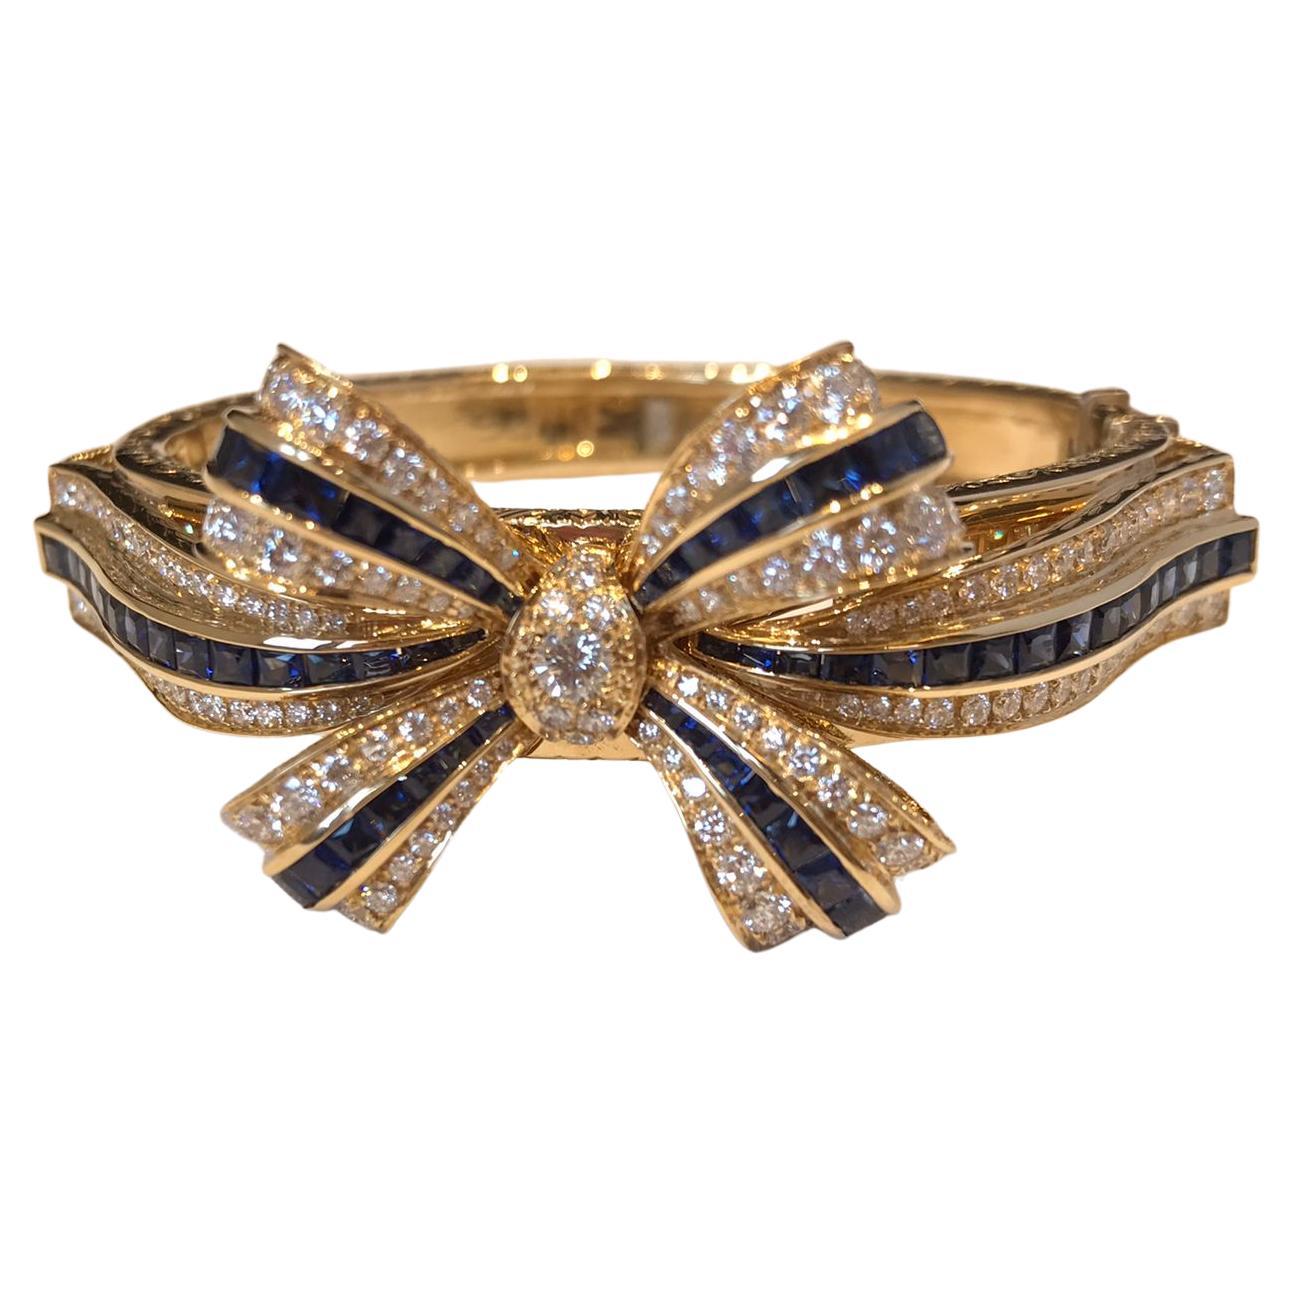 18KT yellow gold bracelet with blue sapphires and diamonds.